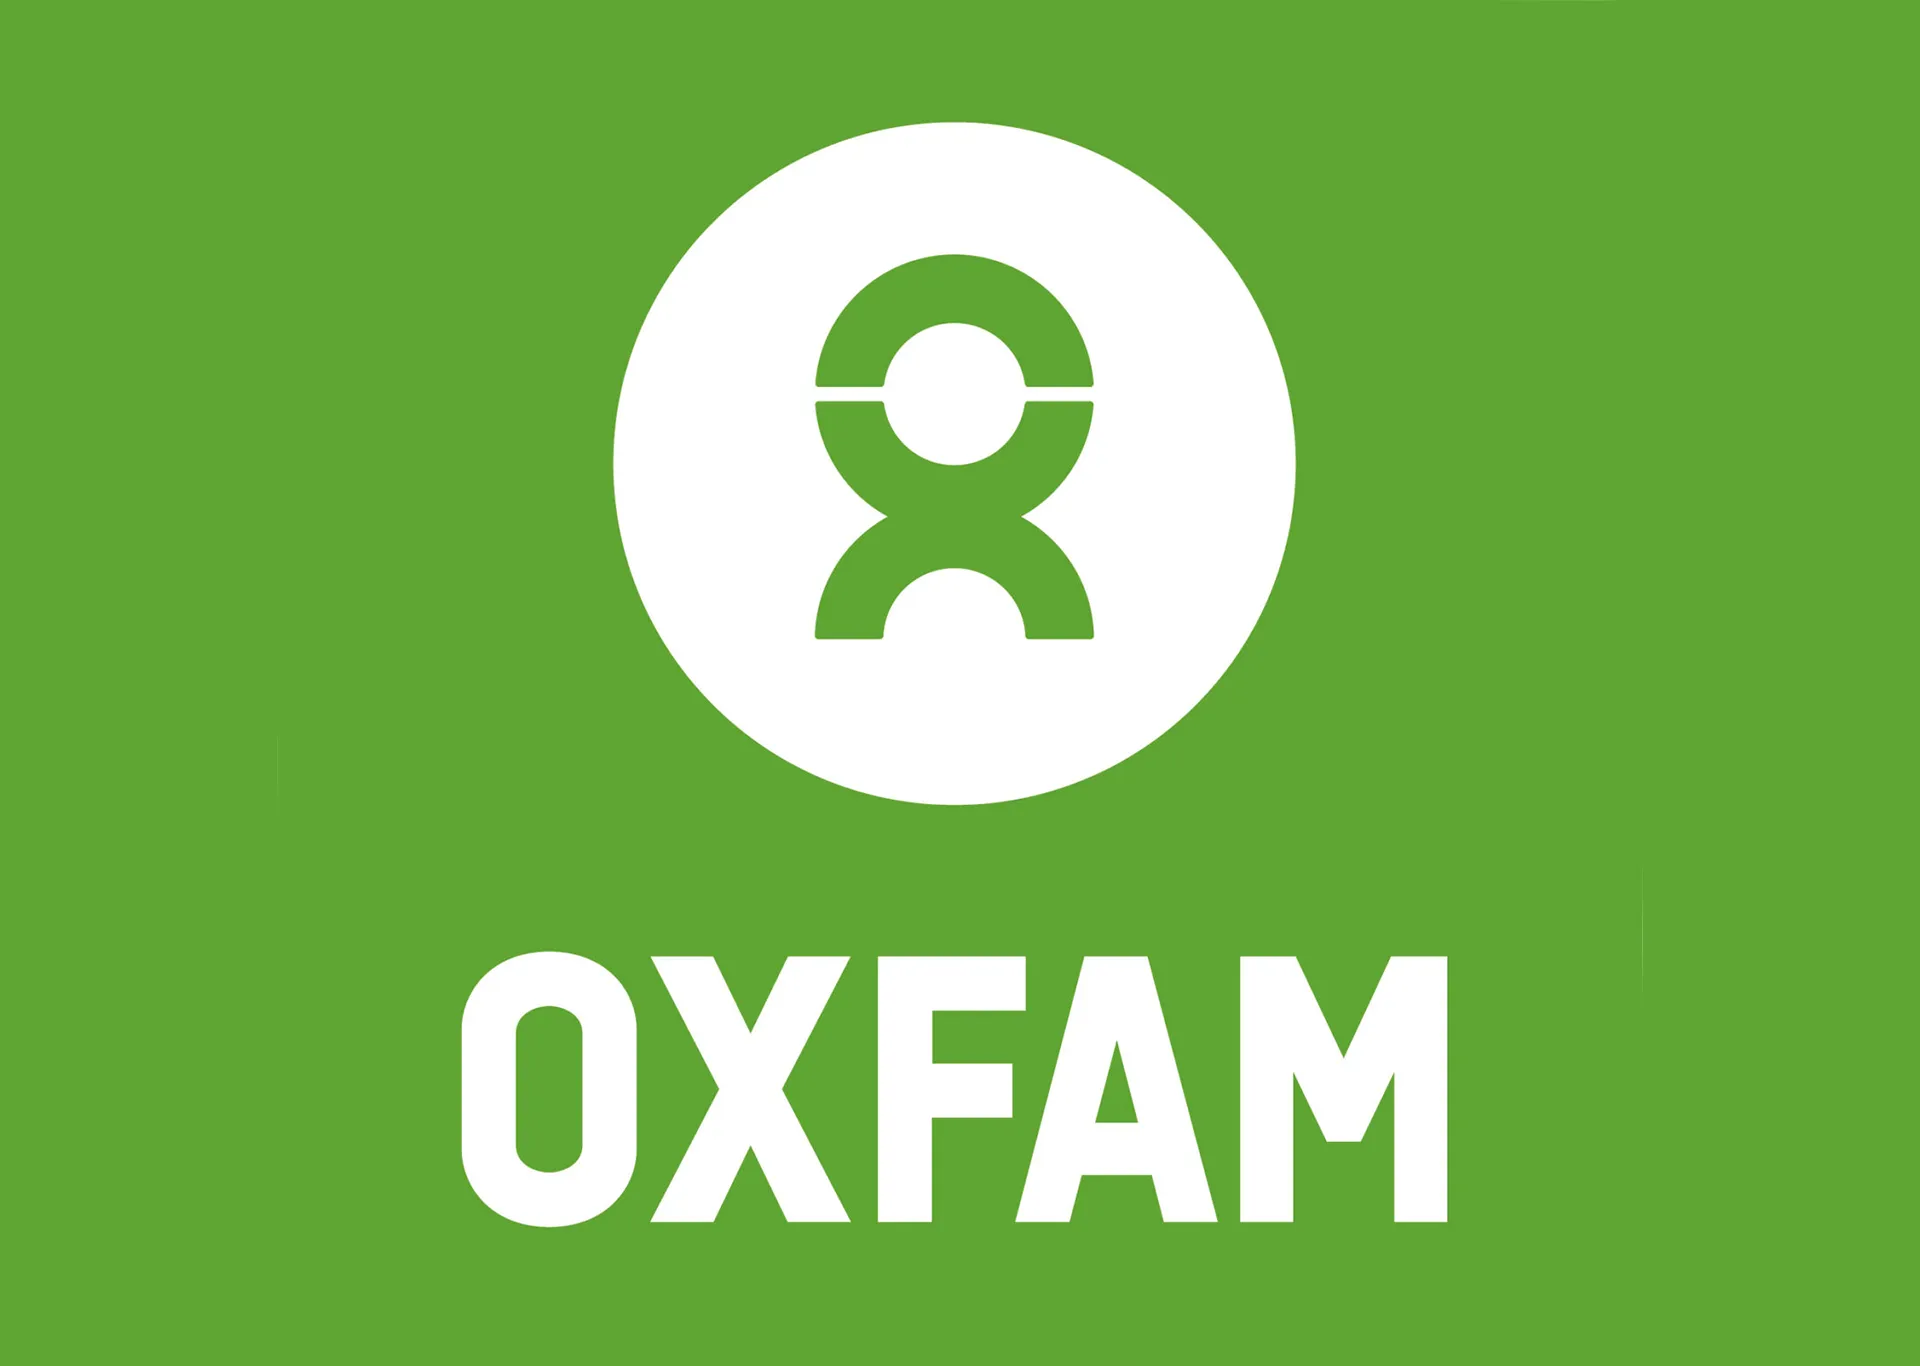 mobile phone recycling supporting oxfam